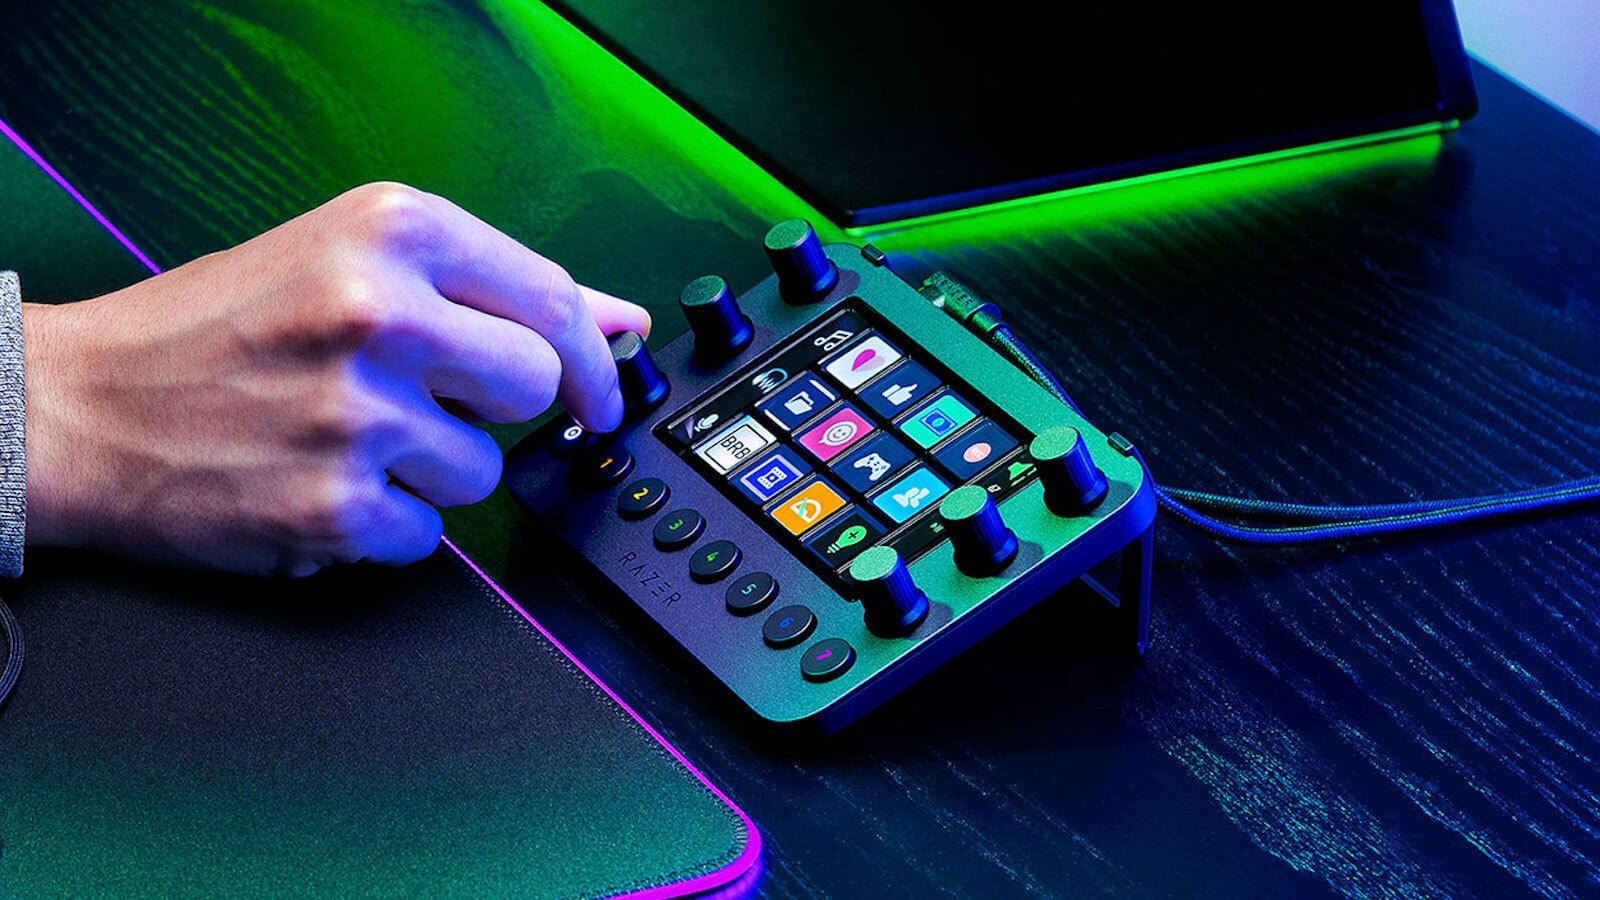 Razer Stream Controller has a customizable touchscreen for instant access to any function